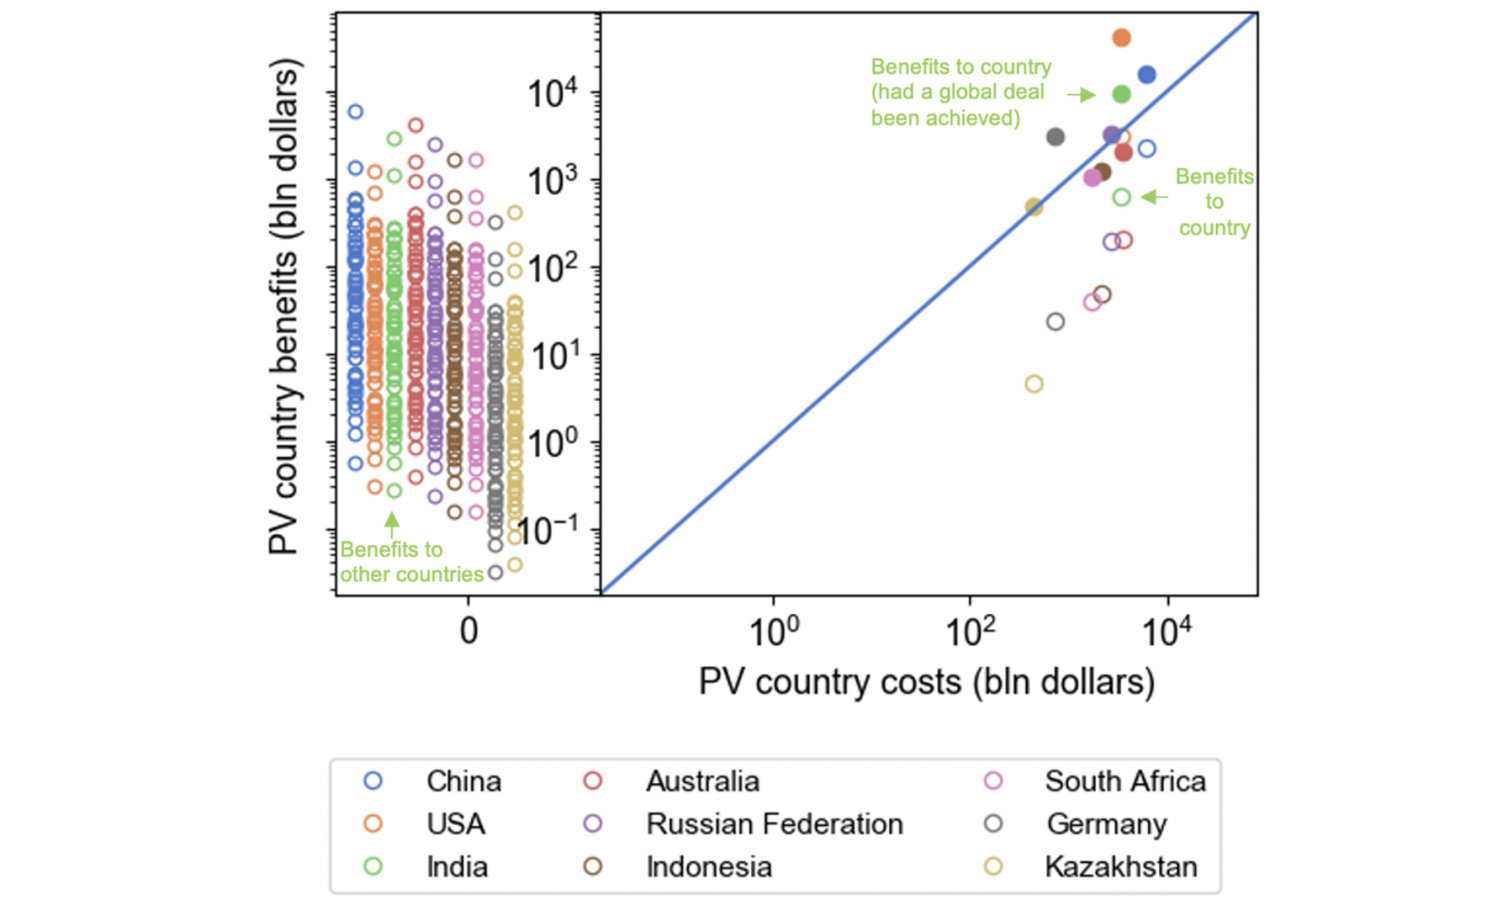 igure 4 Present value of costs to phase out coal in one of the top-9 coal countries and present value of benefits this brings both to the country that is phasing out coal (right part), as well as other countries in the world (left part)